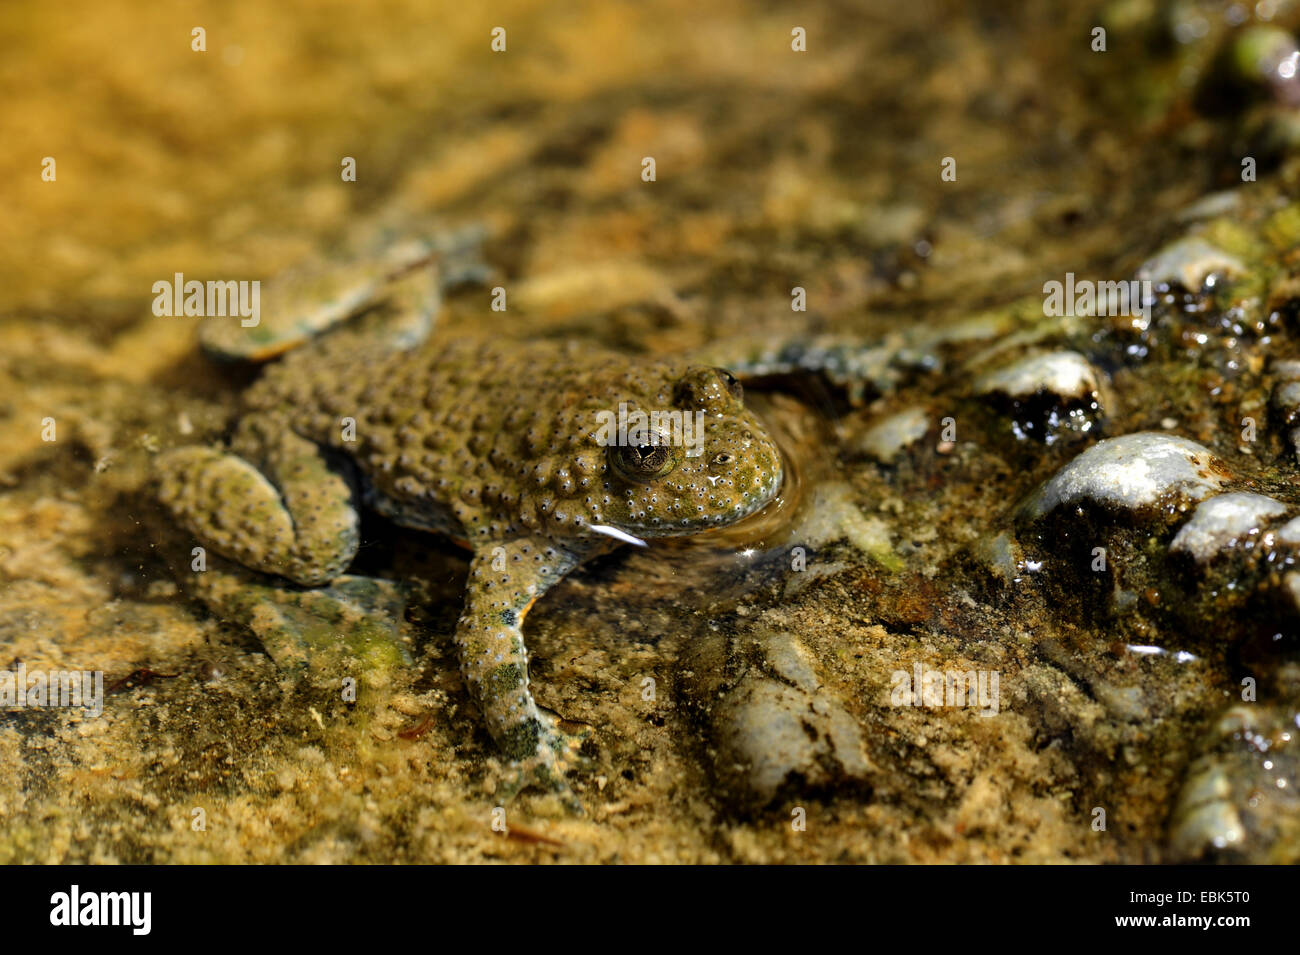 yellow-bellied toad, yellowbelly toad, variegated fire-toad (Bombina variegata), on the shore, Greece, Macedonia Stock Photo